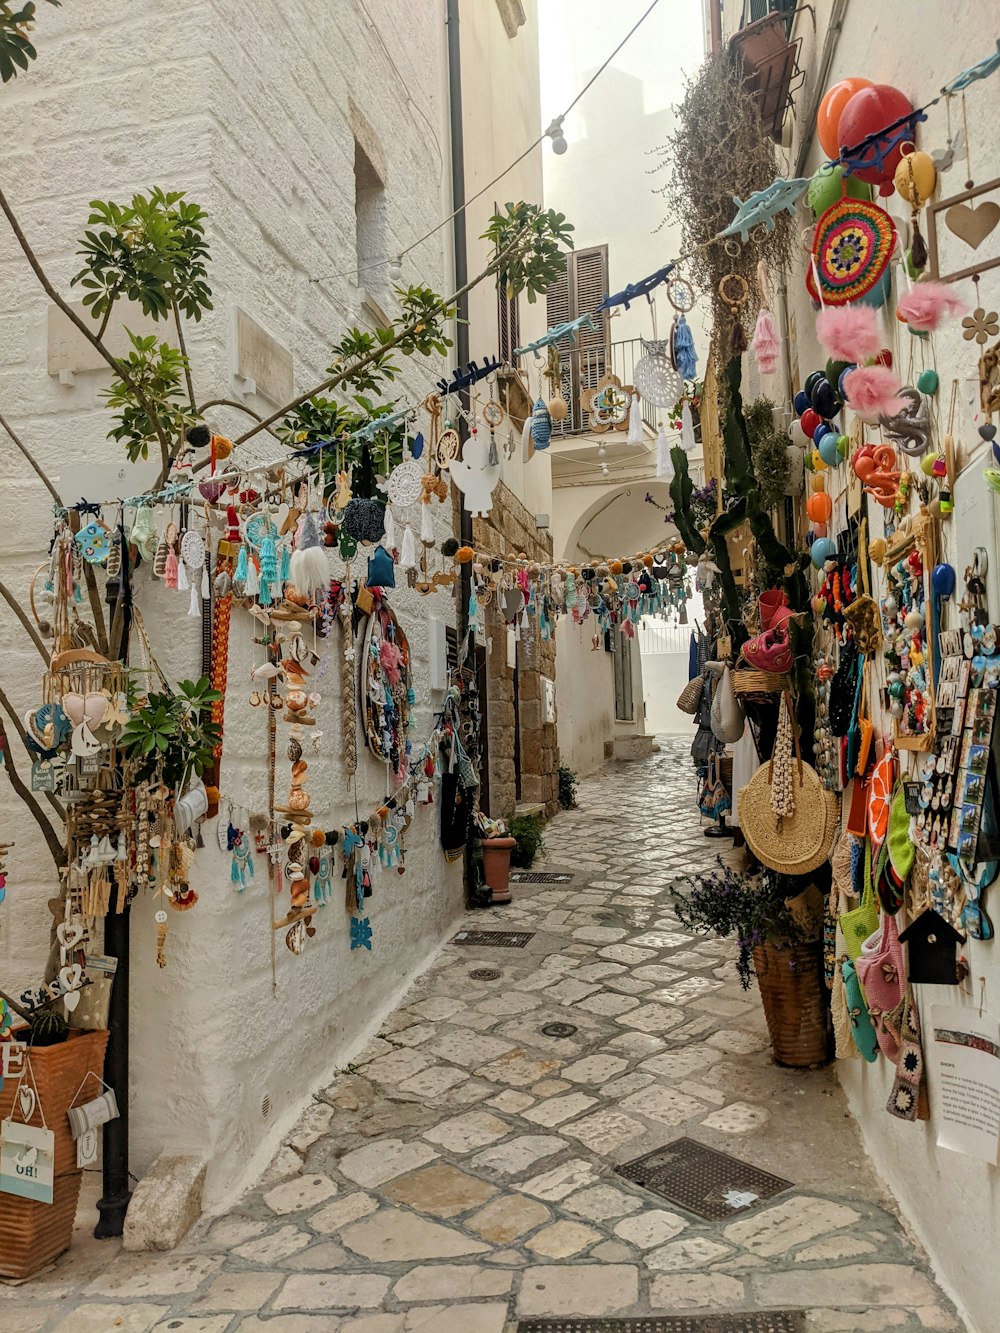 a narrow alley way with a bunch of items hanging on the wall